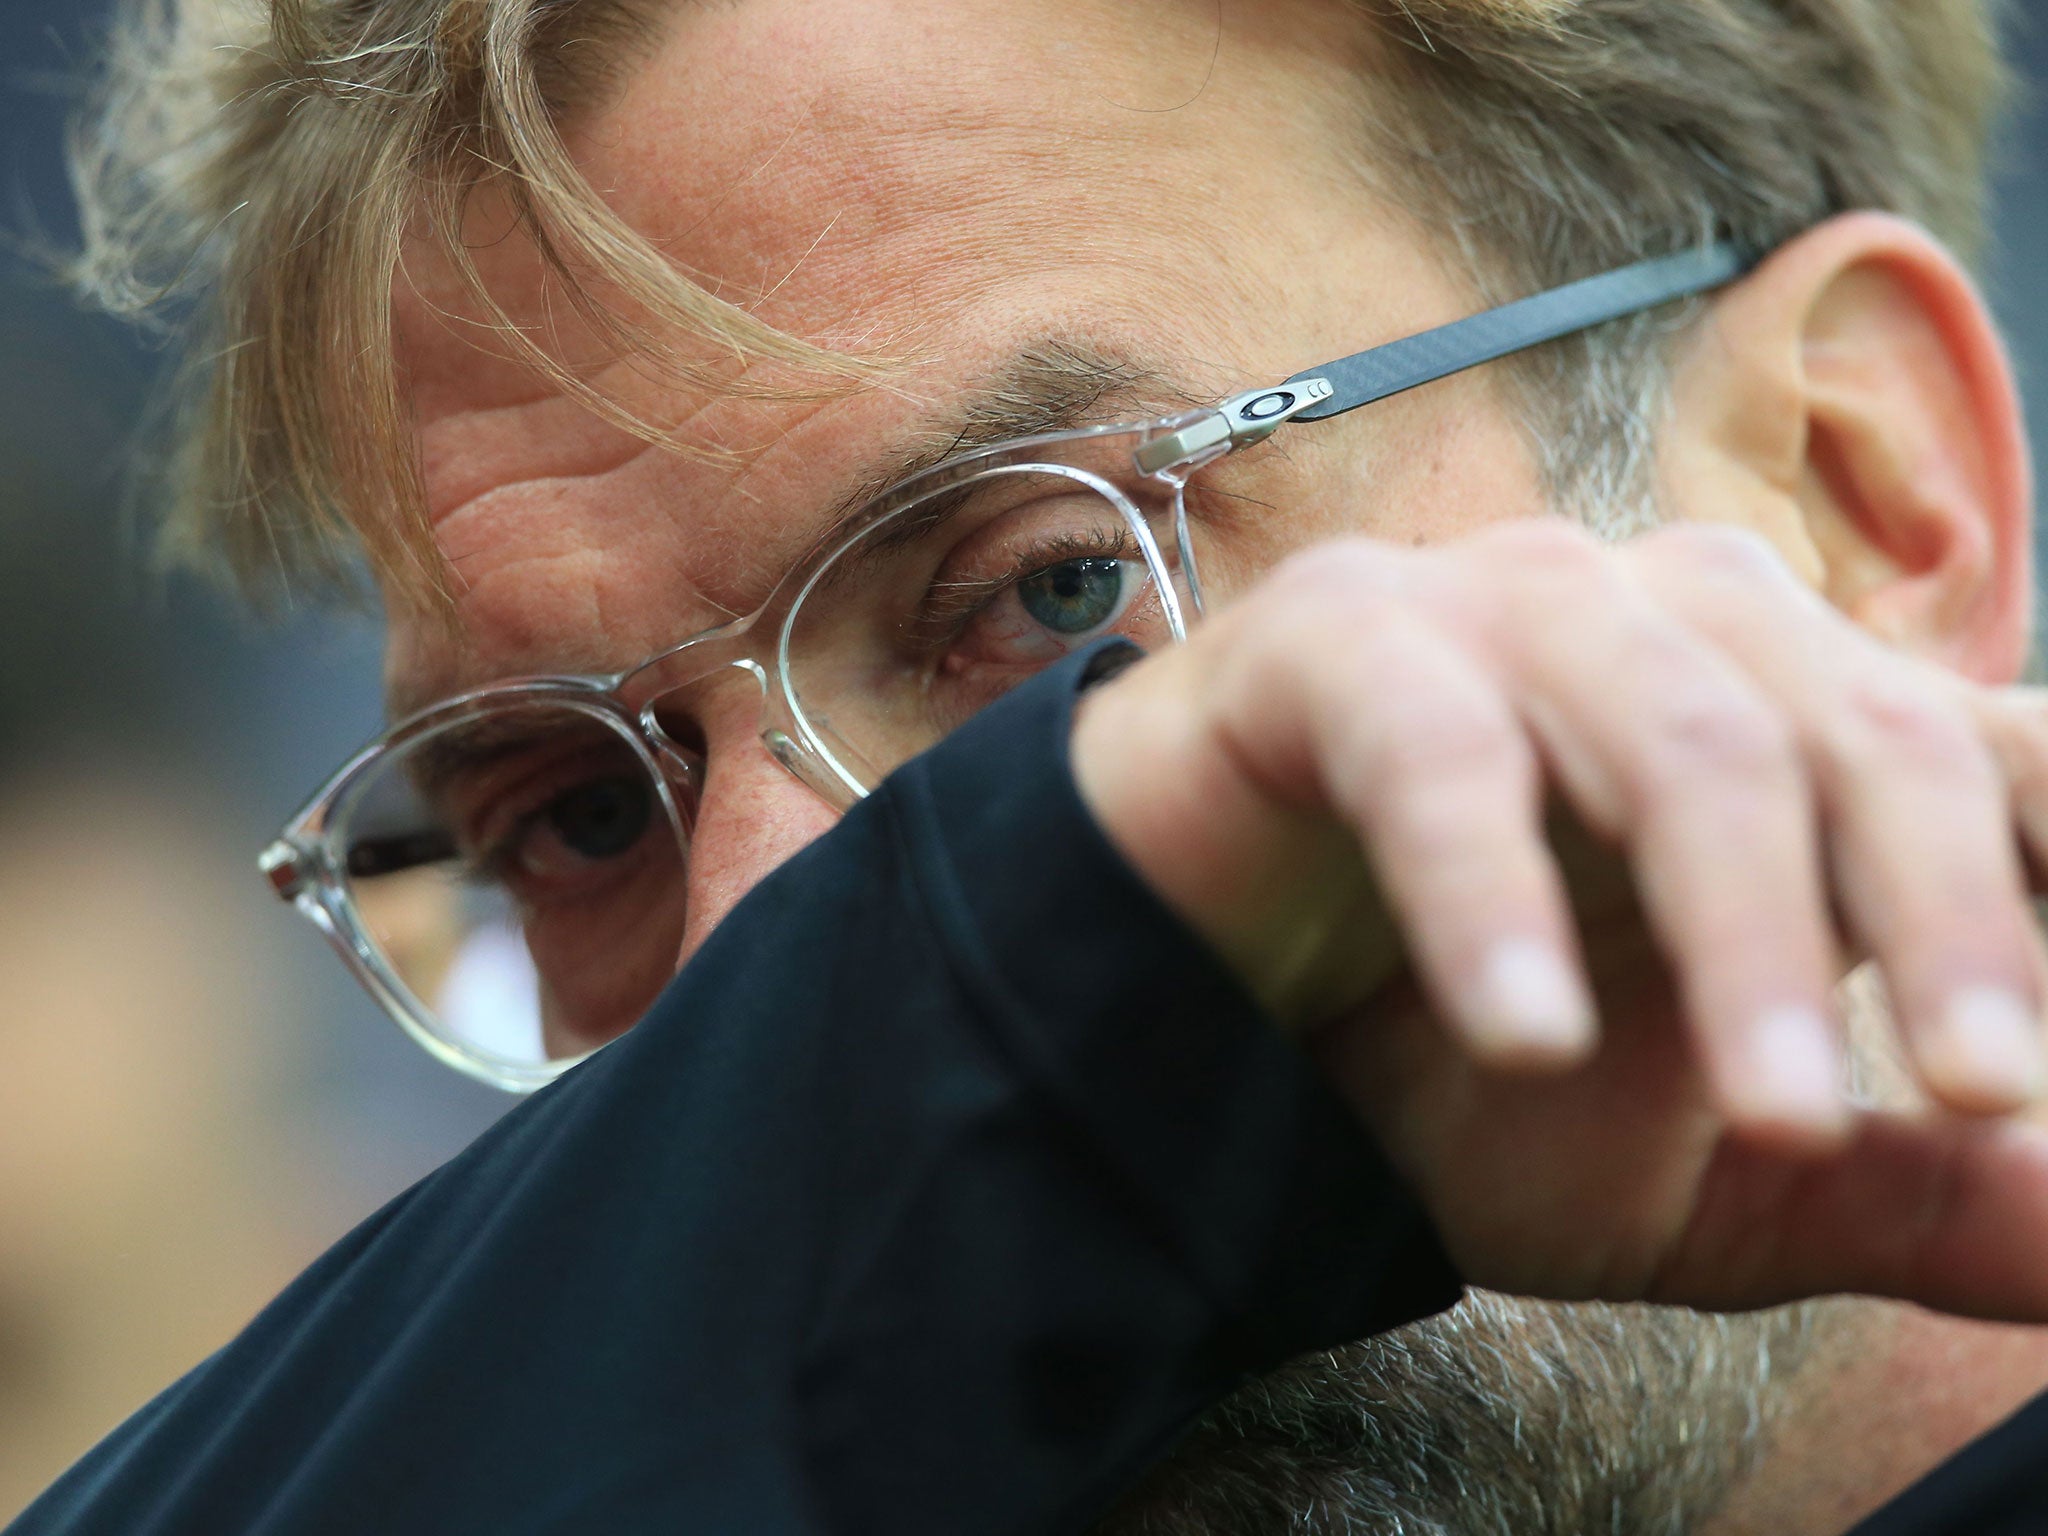 &#13;
Jurgen Klopp was disappointed at more lost points &#13;